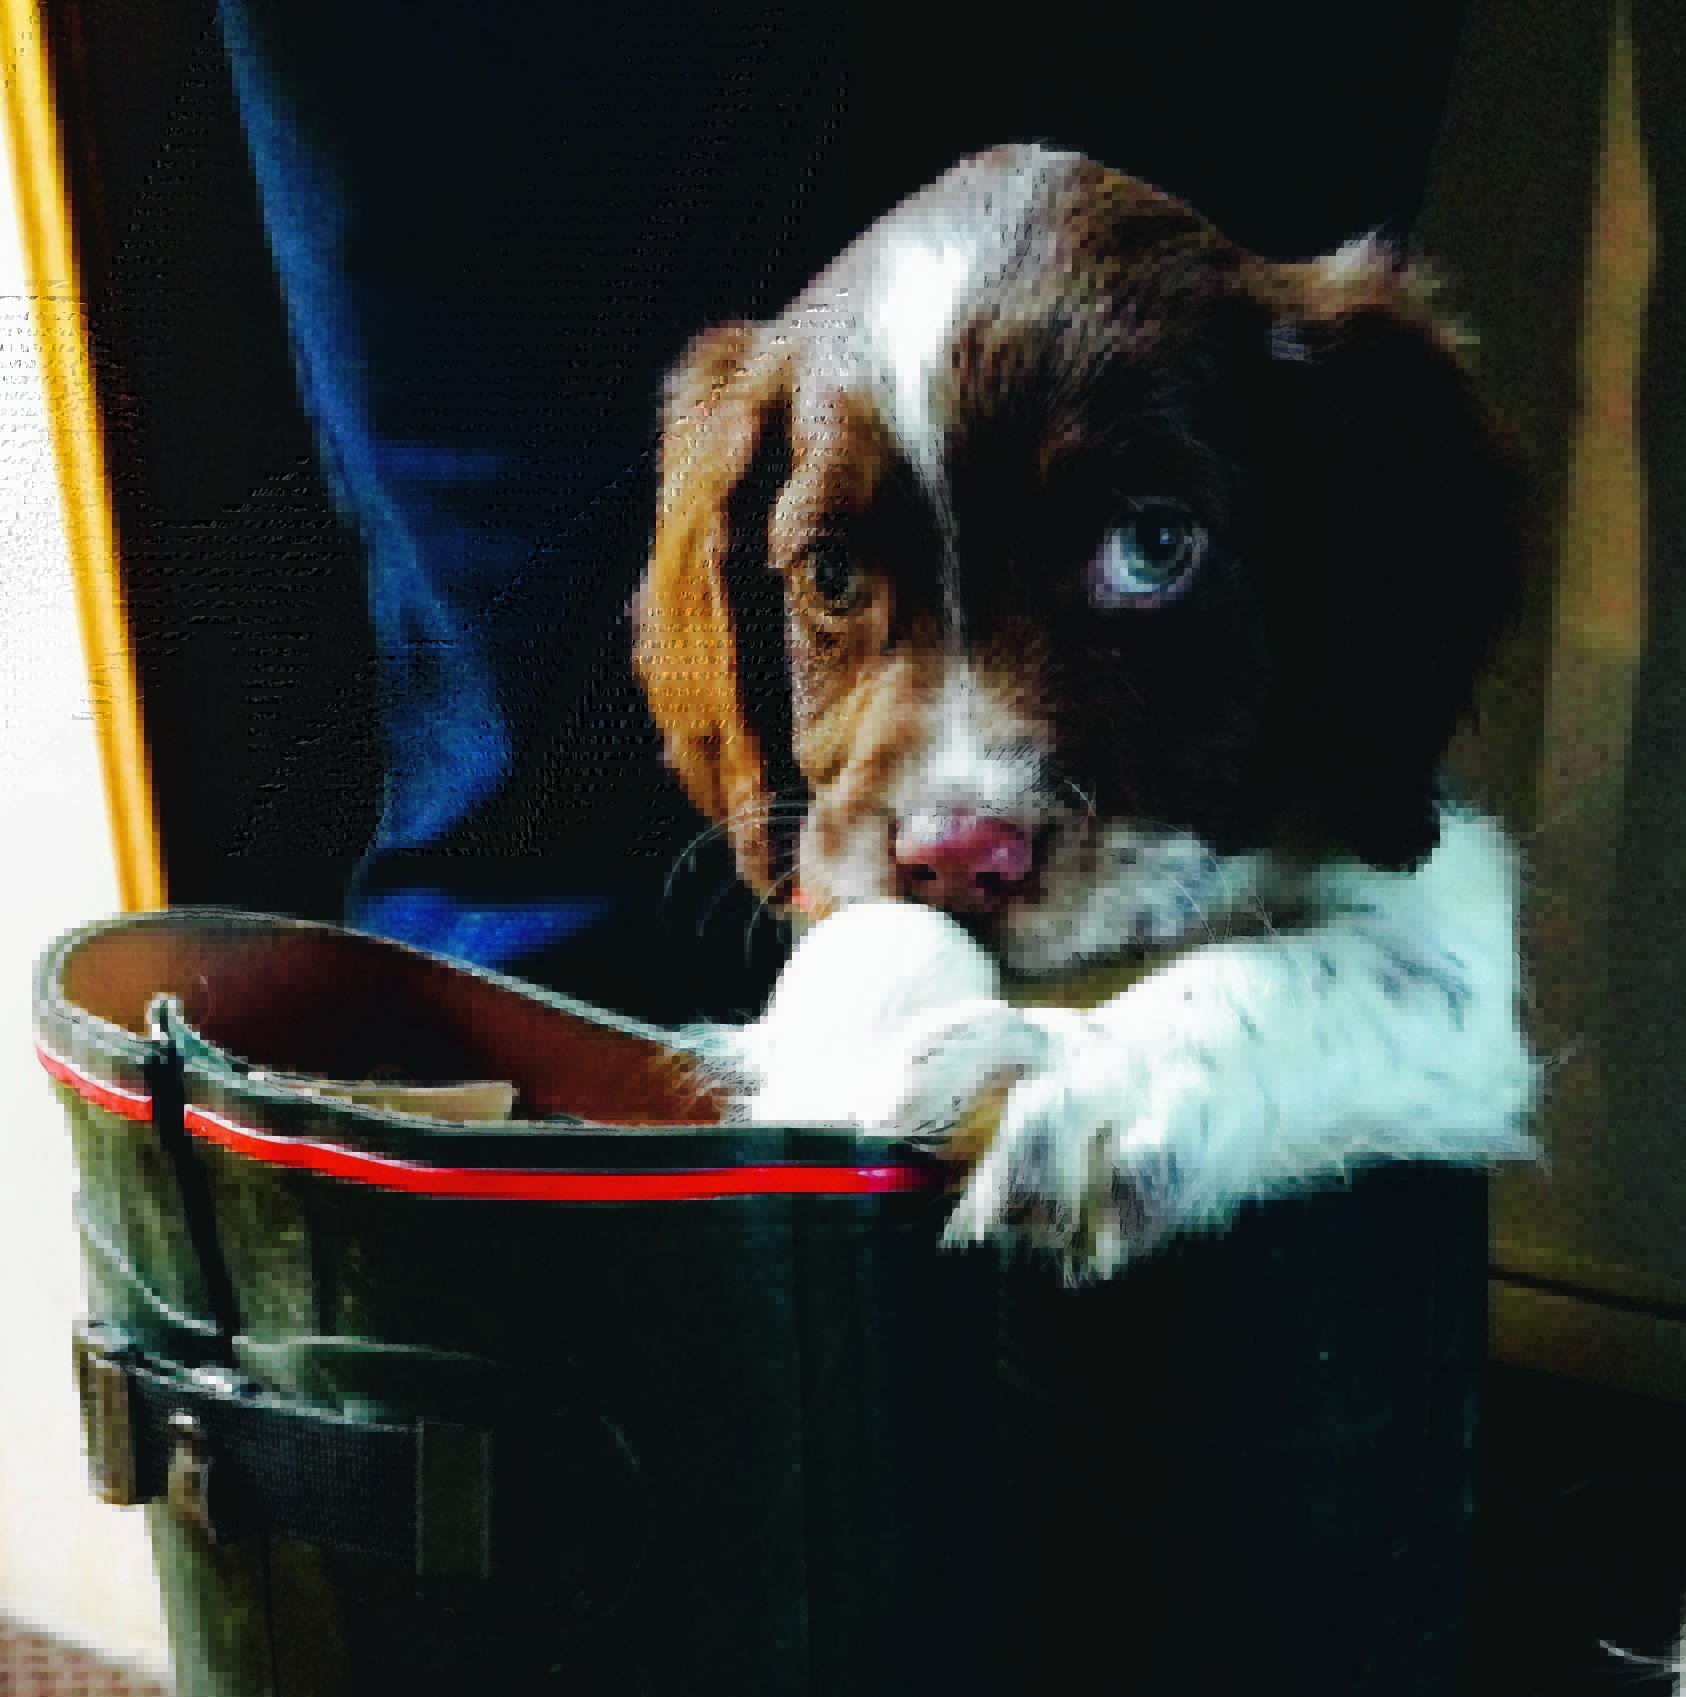 Molly the springer spaniel is the newest addition to the Mclean family who live in Gardenstown, Banff.